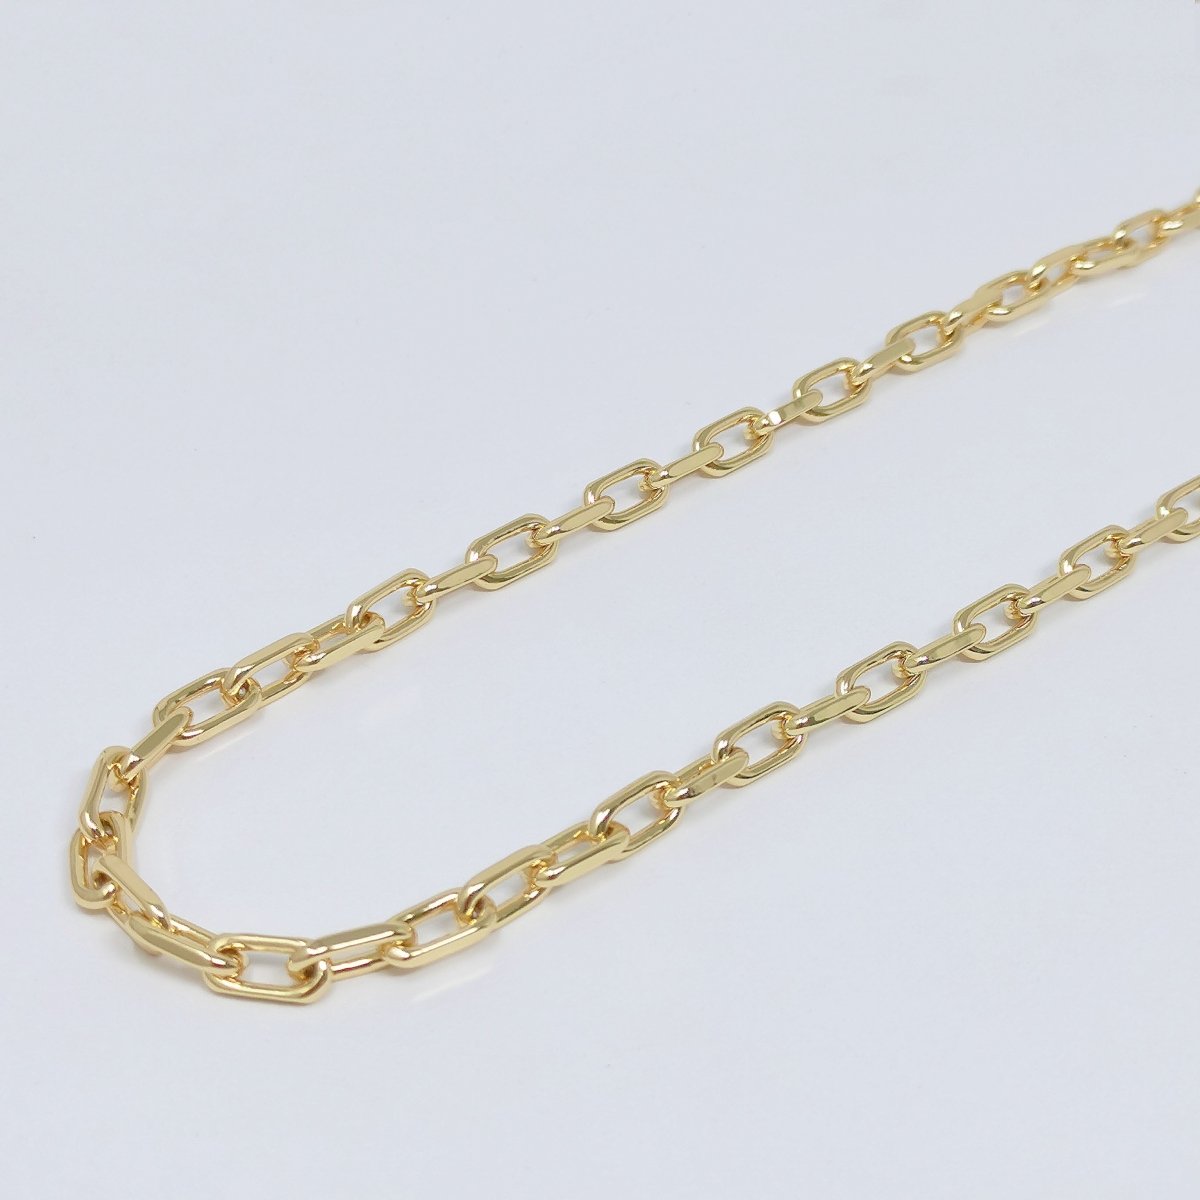 24K Gold Filled Thick Boxy PAPERCLIP Elongated Chain Sold by Yard, For Jewelry Making, Necklace Bracelet Anklet Component Supply | ROLL-071 ROLL-076 ROLL-399 ROLL-418 Clearance Pricing - DLUXCA